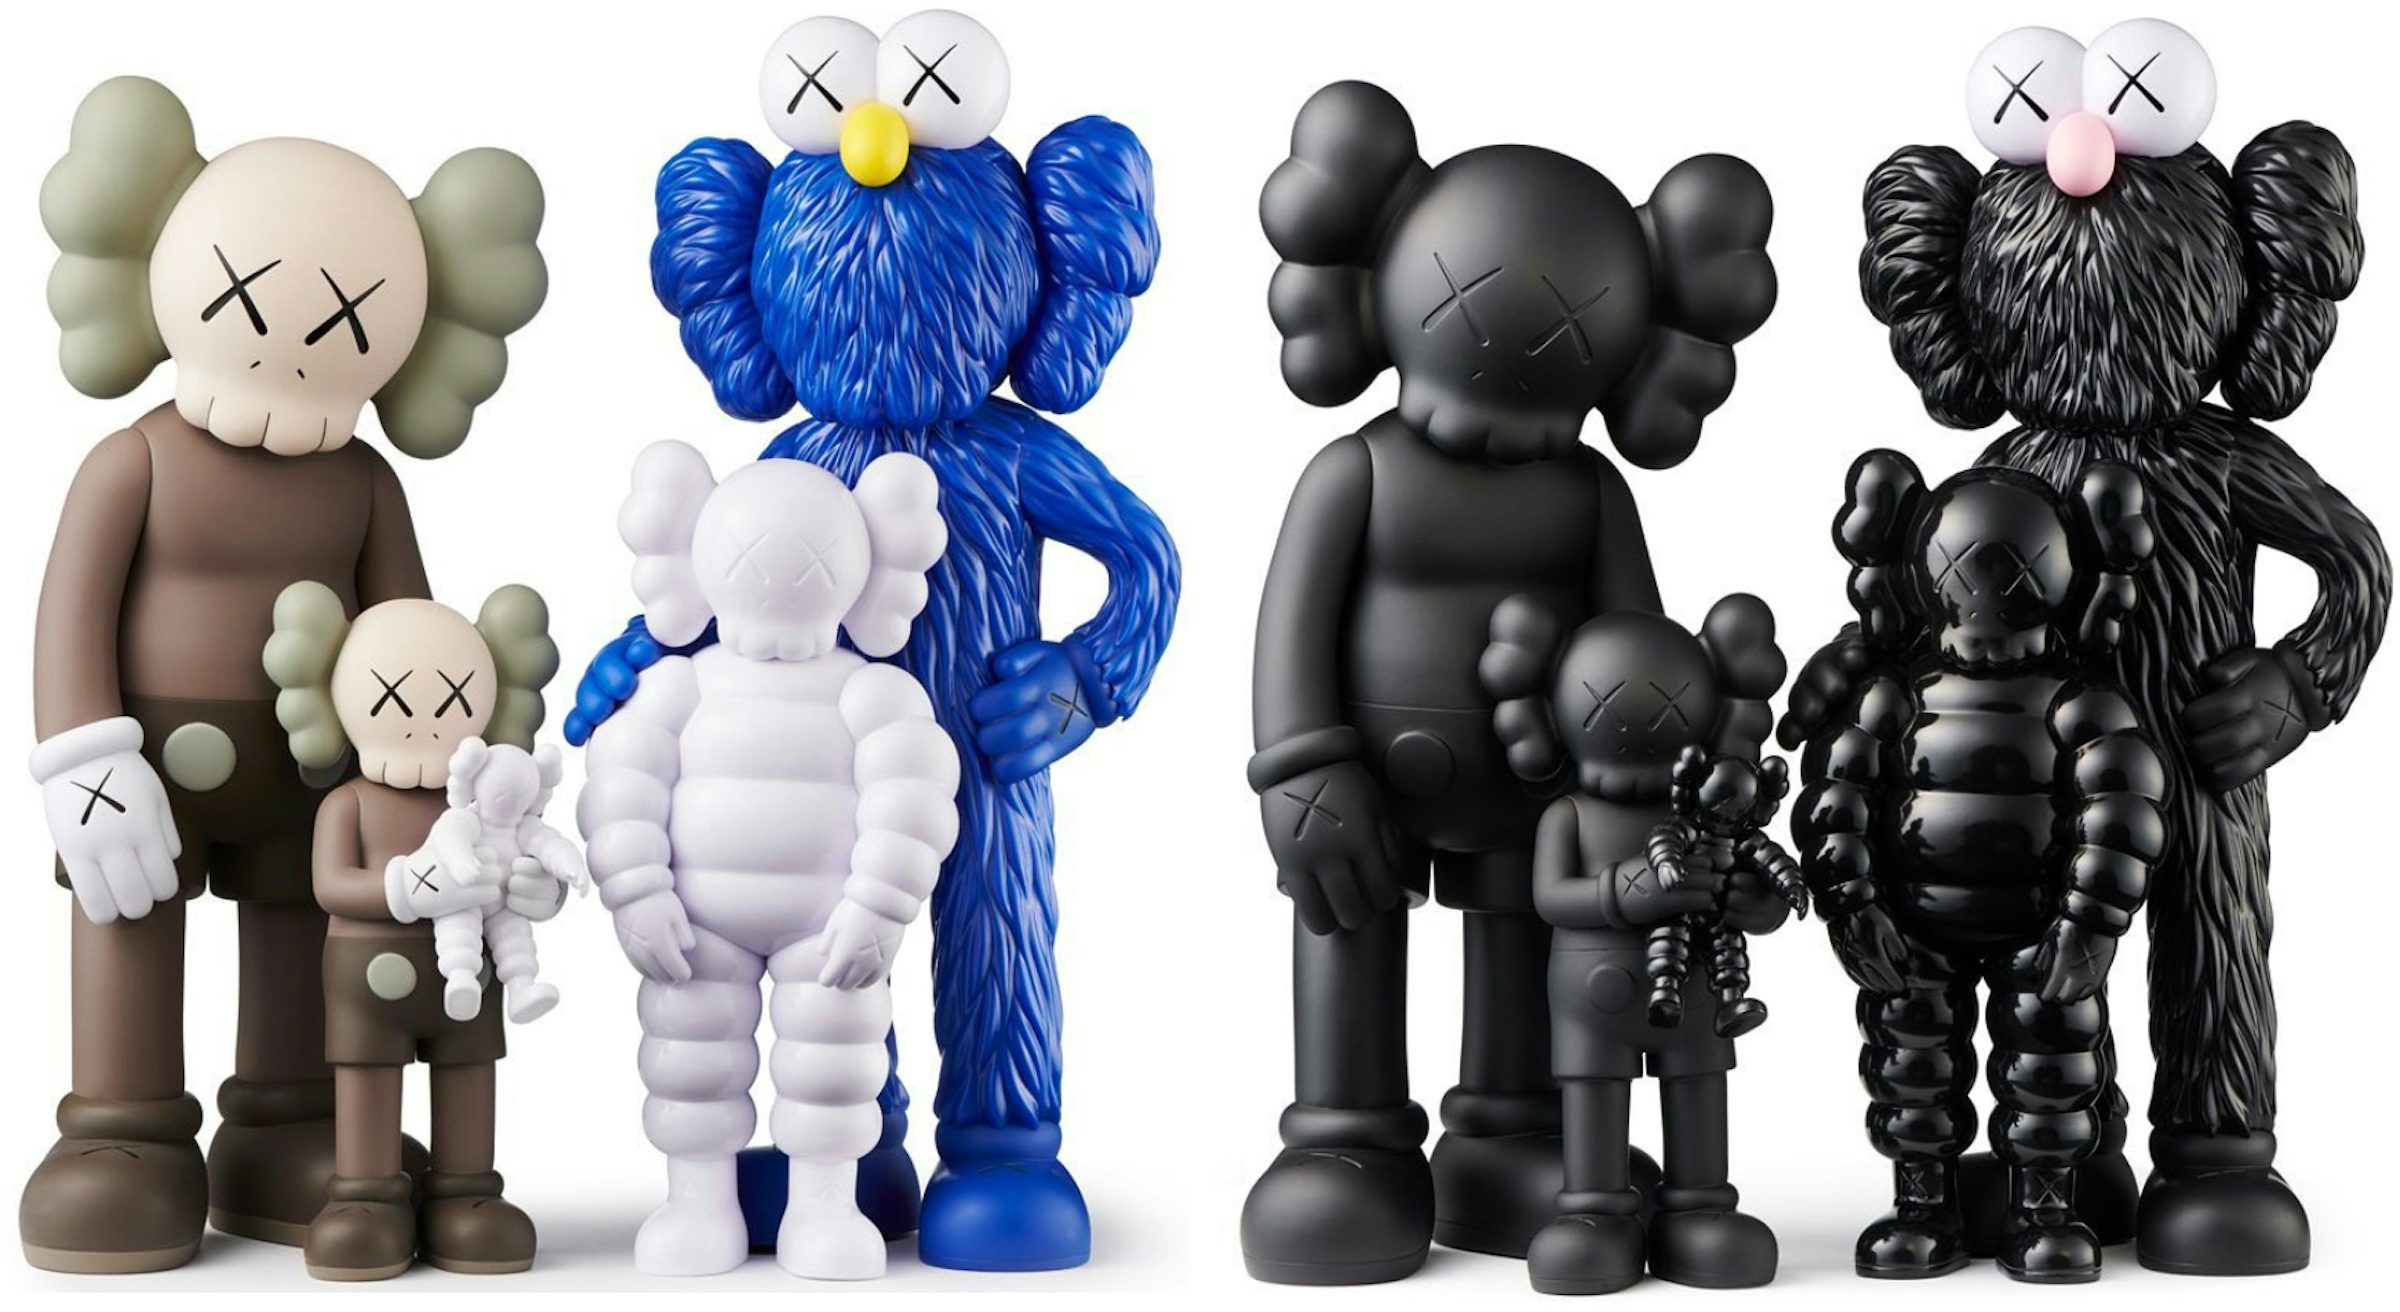 A Guide to KAWS' Figures